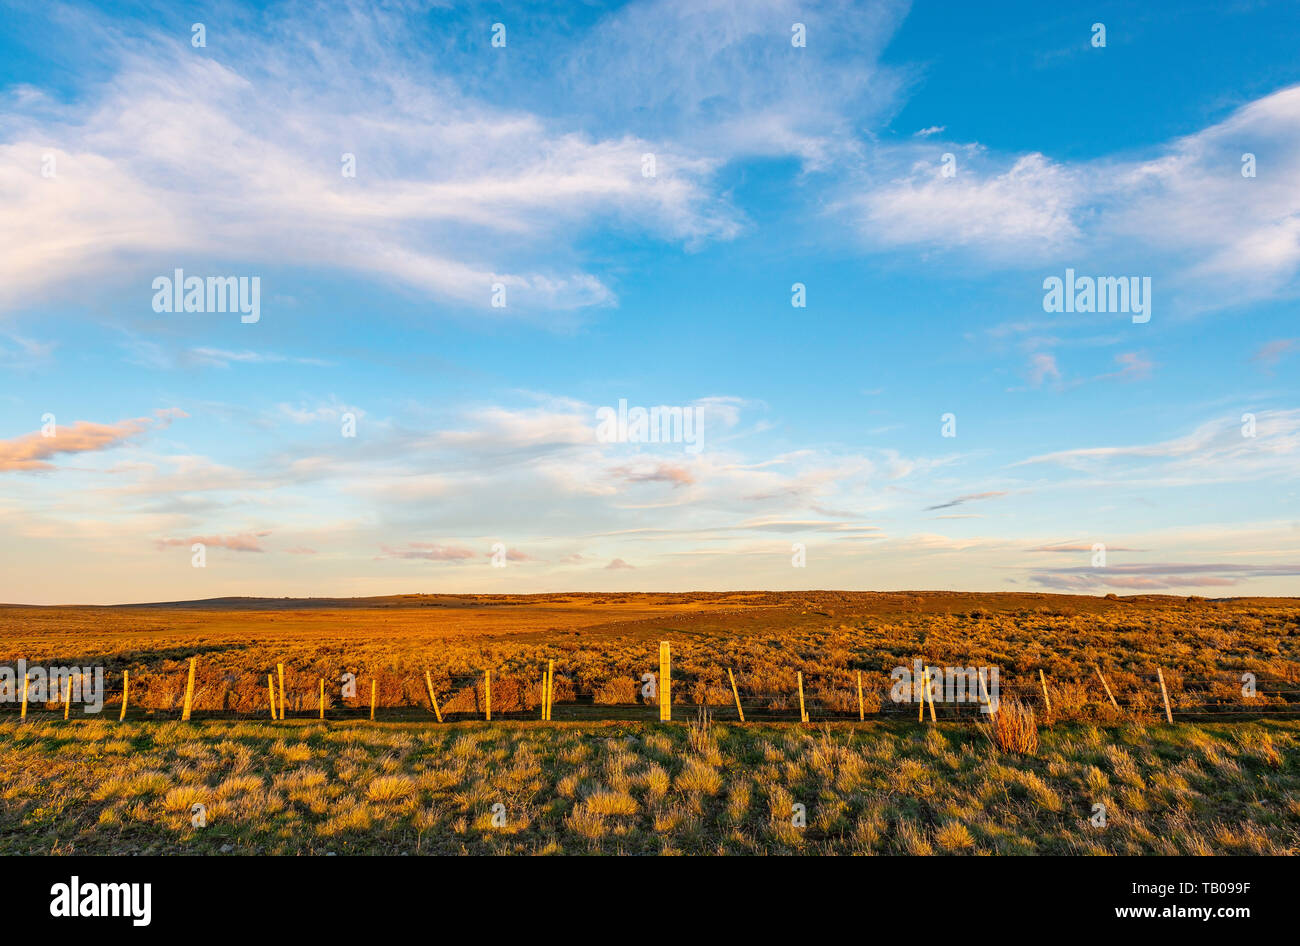 Steppe landscape in Patagonia at sunset between Punta Arenas and Puerto Natales, Chile. This landscape is generic for southern Chile and Argentina. Stock Photo